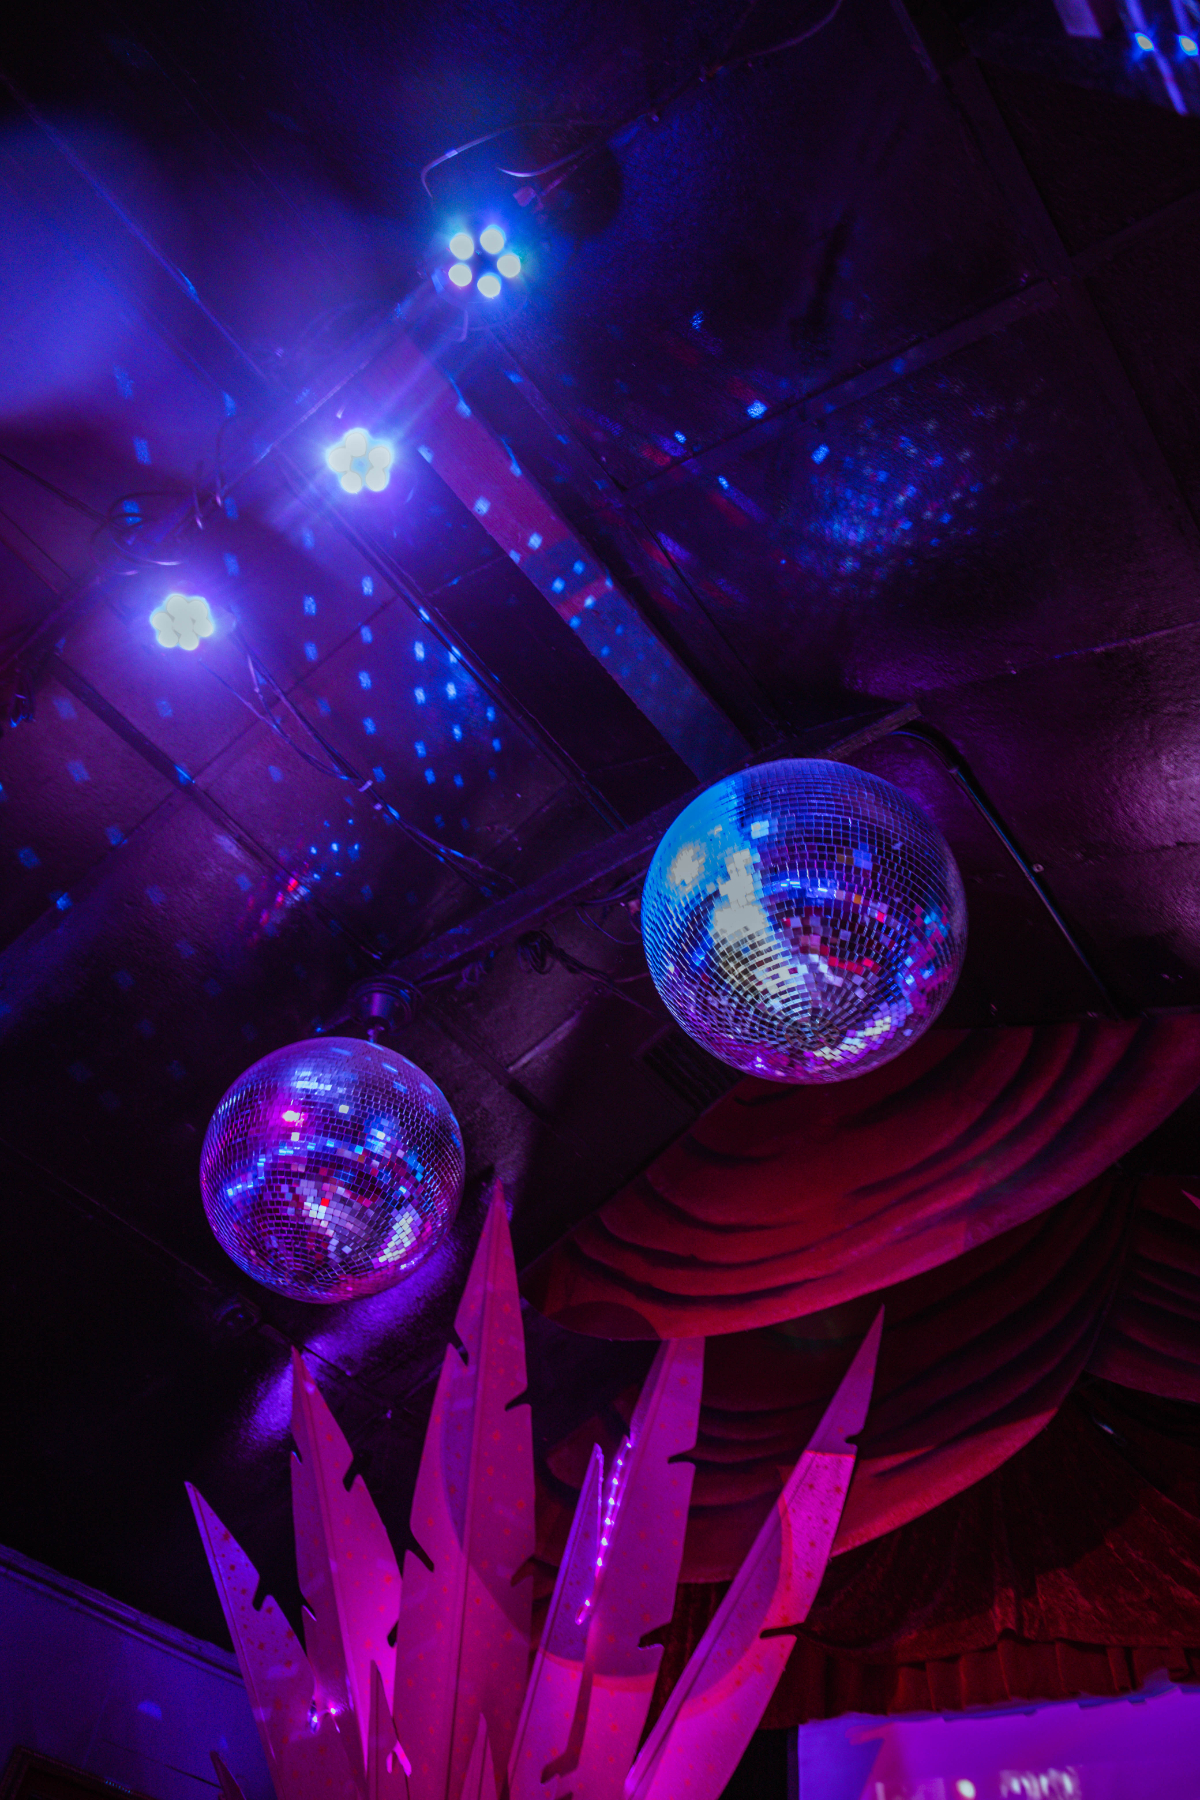 Disco balls in a dark room lit up with pink and purple lights